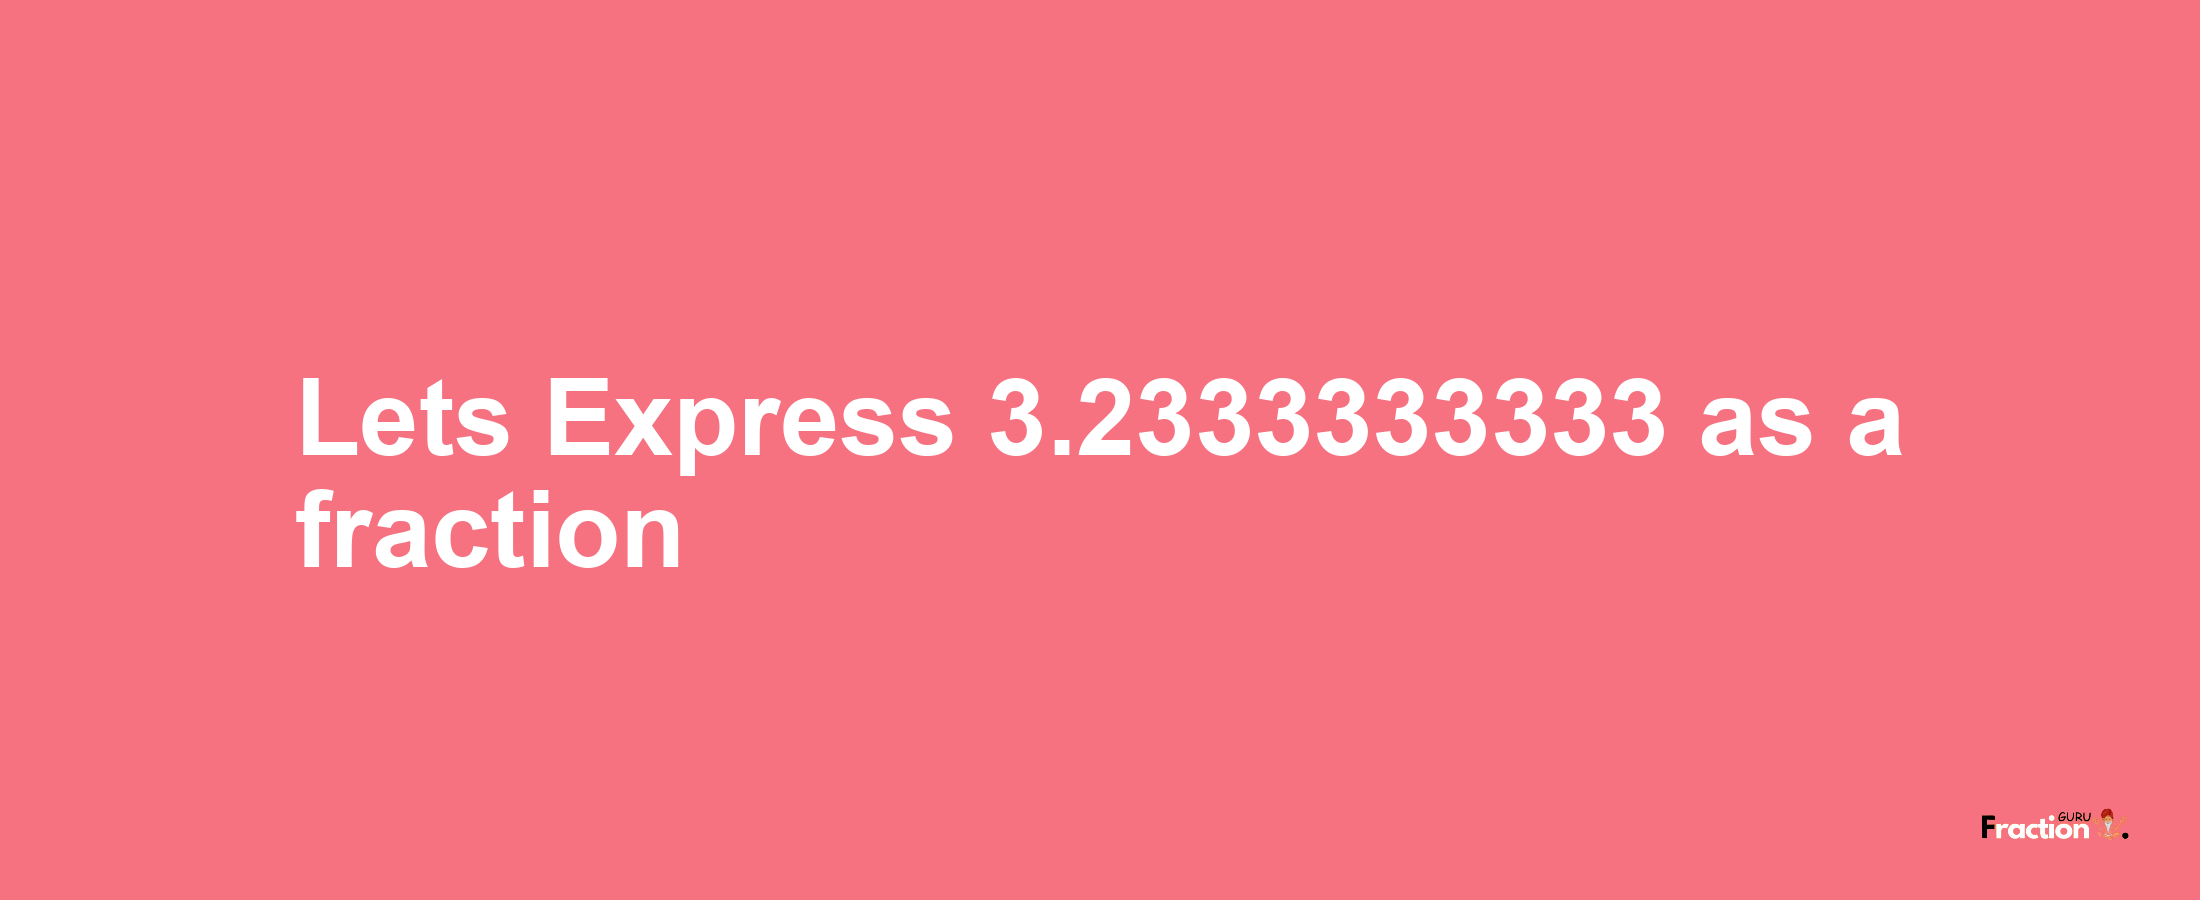 Lets Express 3.2333333333 as afraction